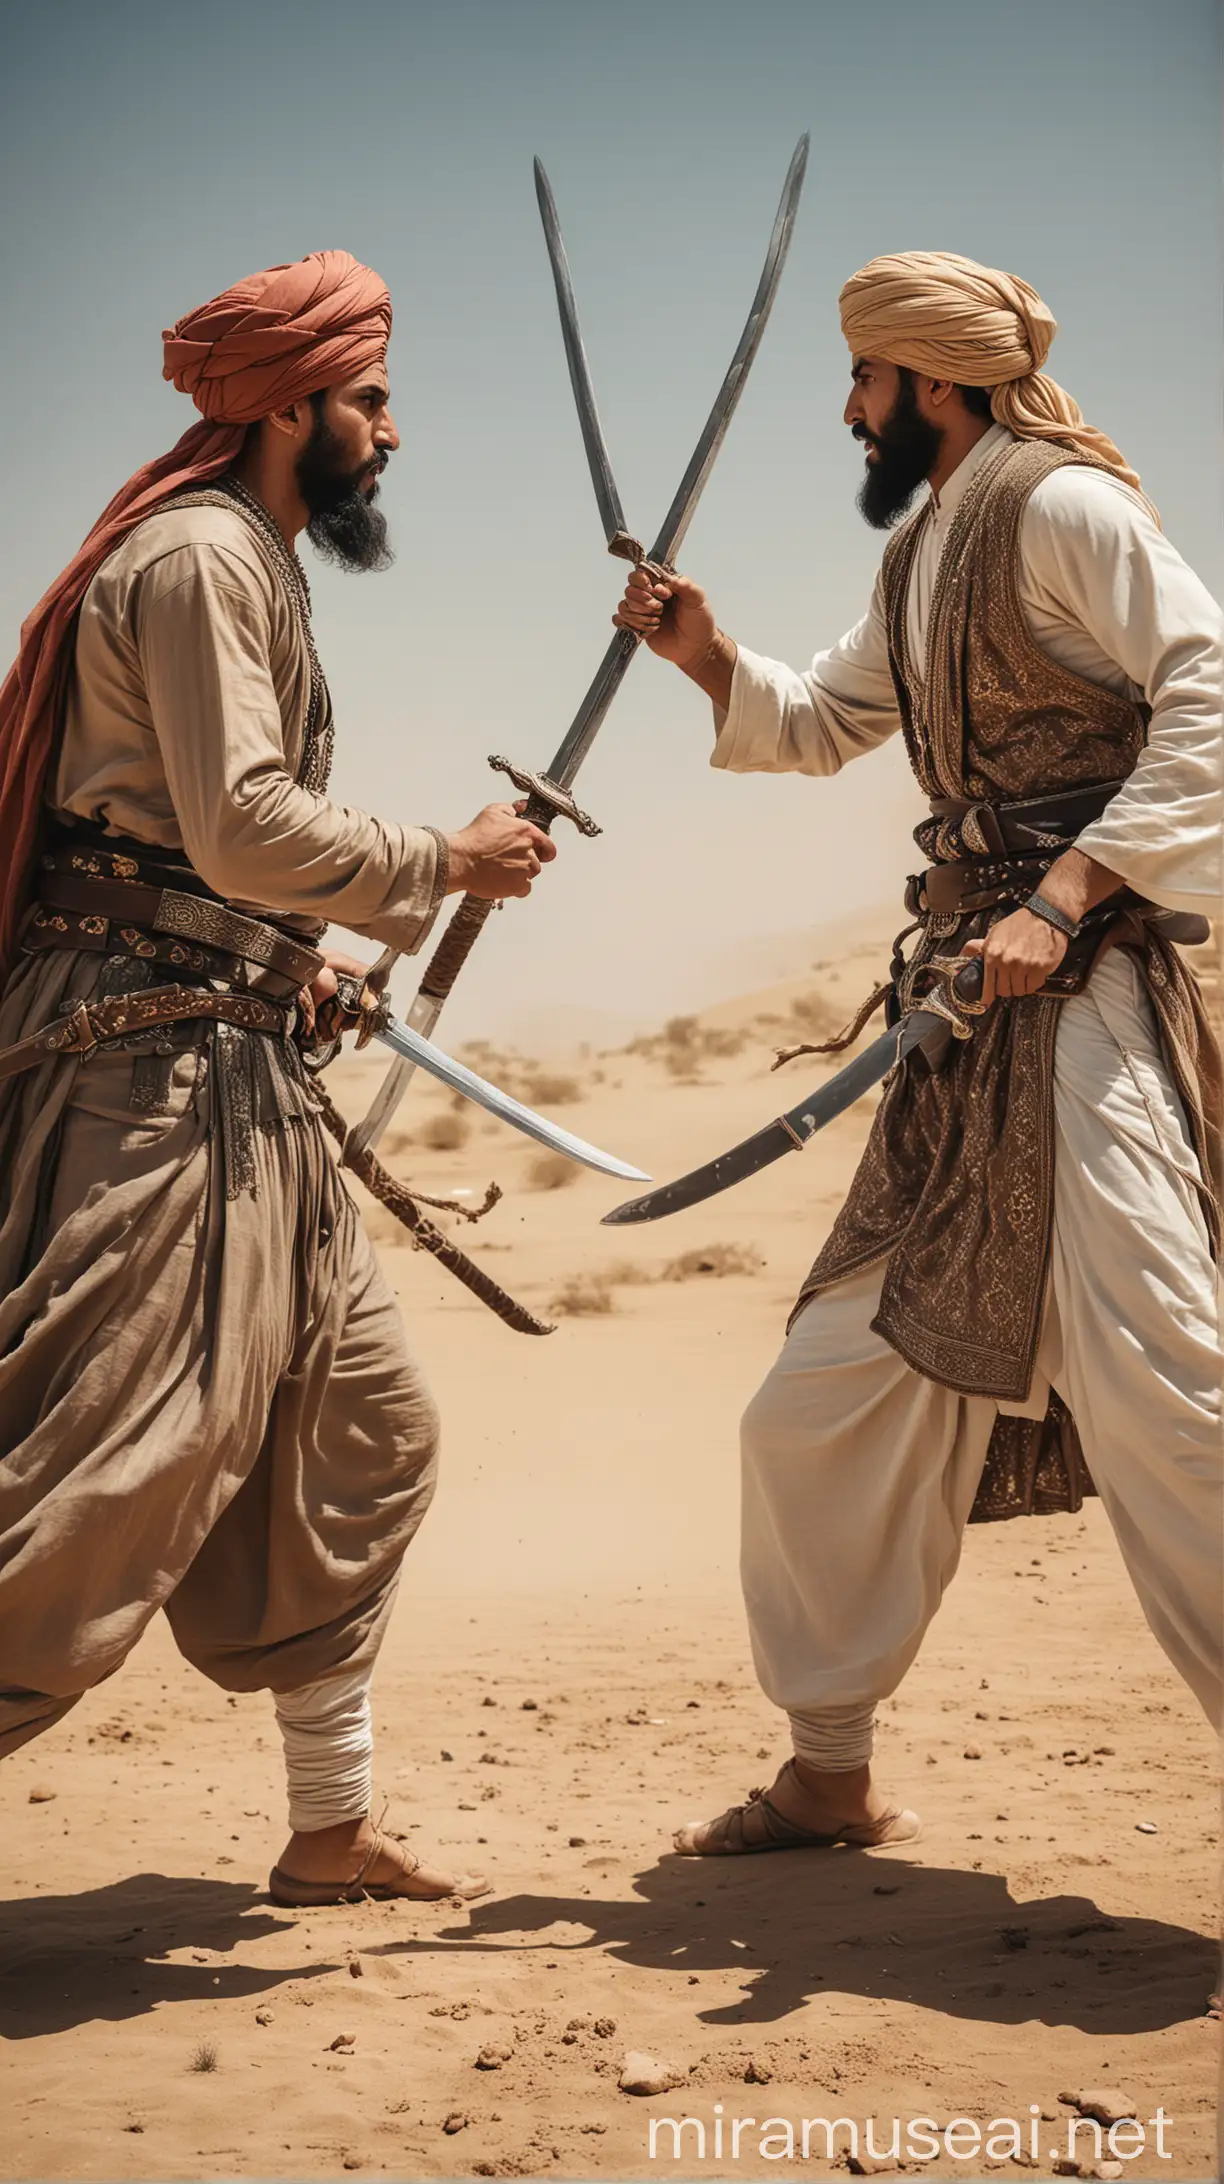 Arabic Warriors Dueling with Swords in Battlefield Reflection